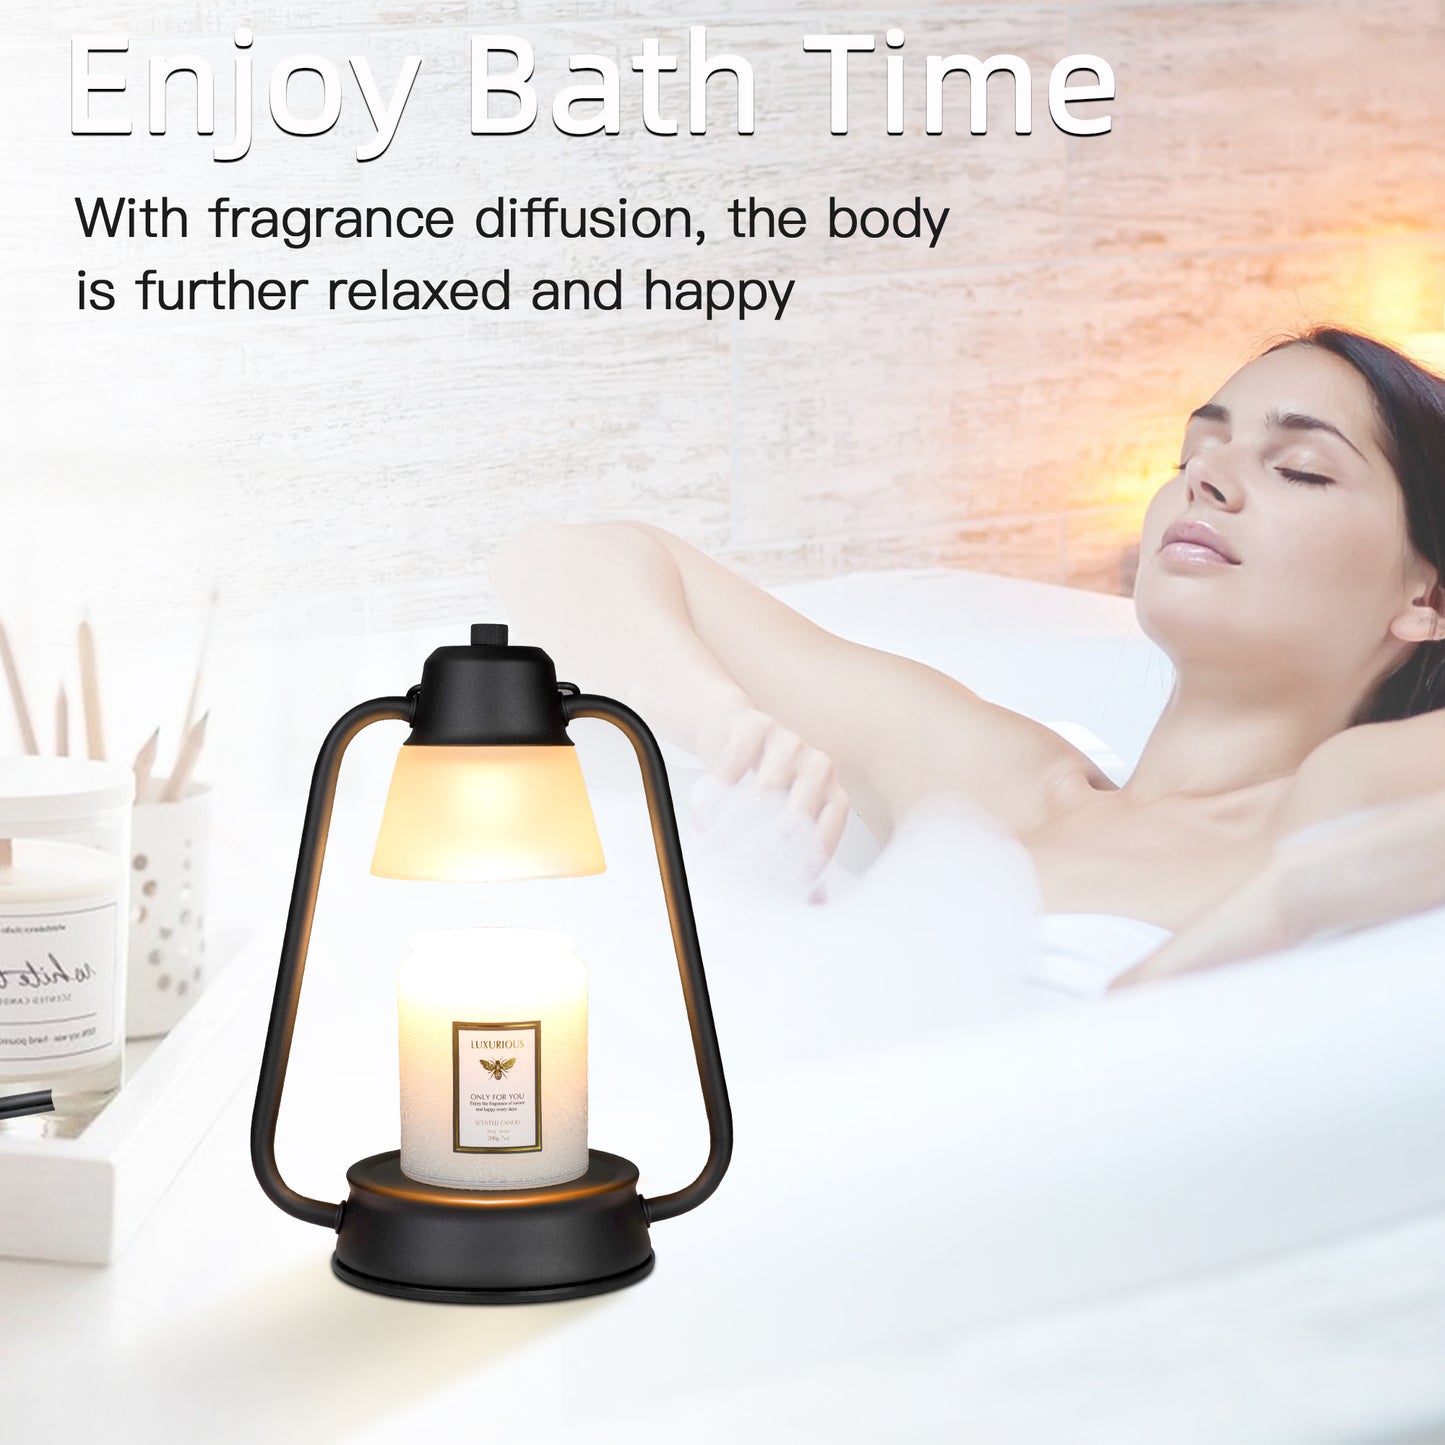 Hidnvefen Candle Warmer Lamp with Timer - Dimmable Electric Wax Melter for Long Lasting Fragrance - Perfect Home Decor